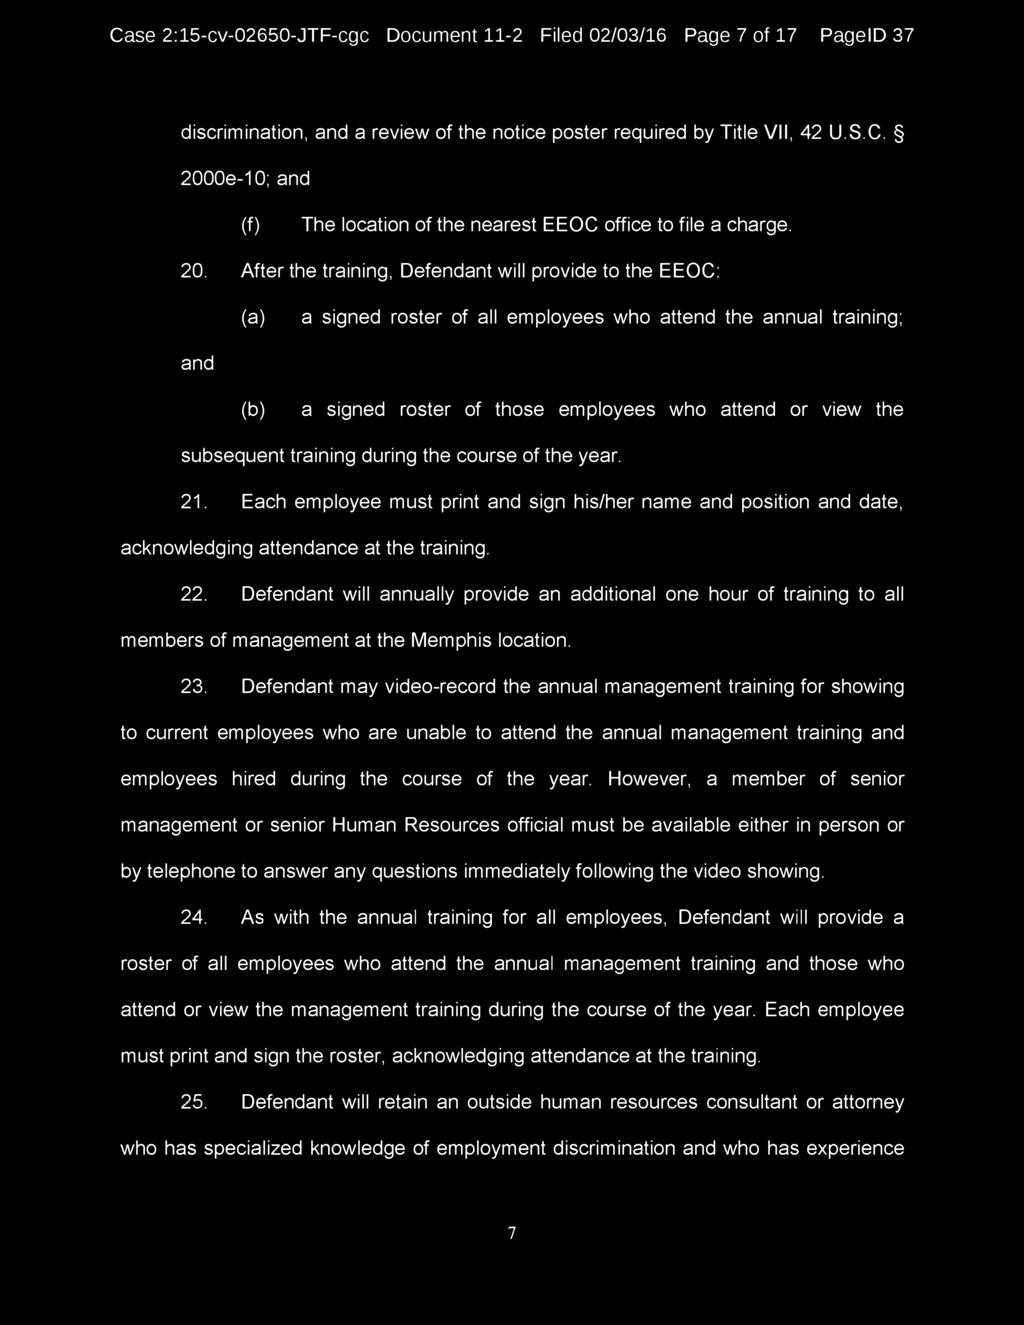 Case 2:15-cv-02650-JTF-cgc Document 11-2 Filed 02/03/16 Page 7 of 17 PagelD 37 discrimination, and a review of the notice poster required by Title VII, 42 U.S.C. 2000e-10; and (f) The location of the nearest EEOC office to file a charge.